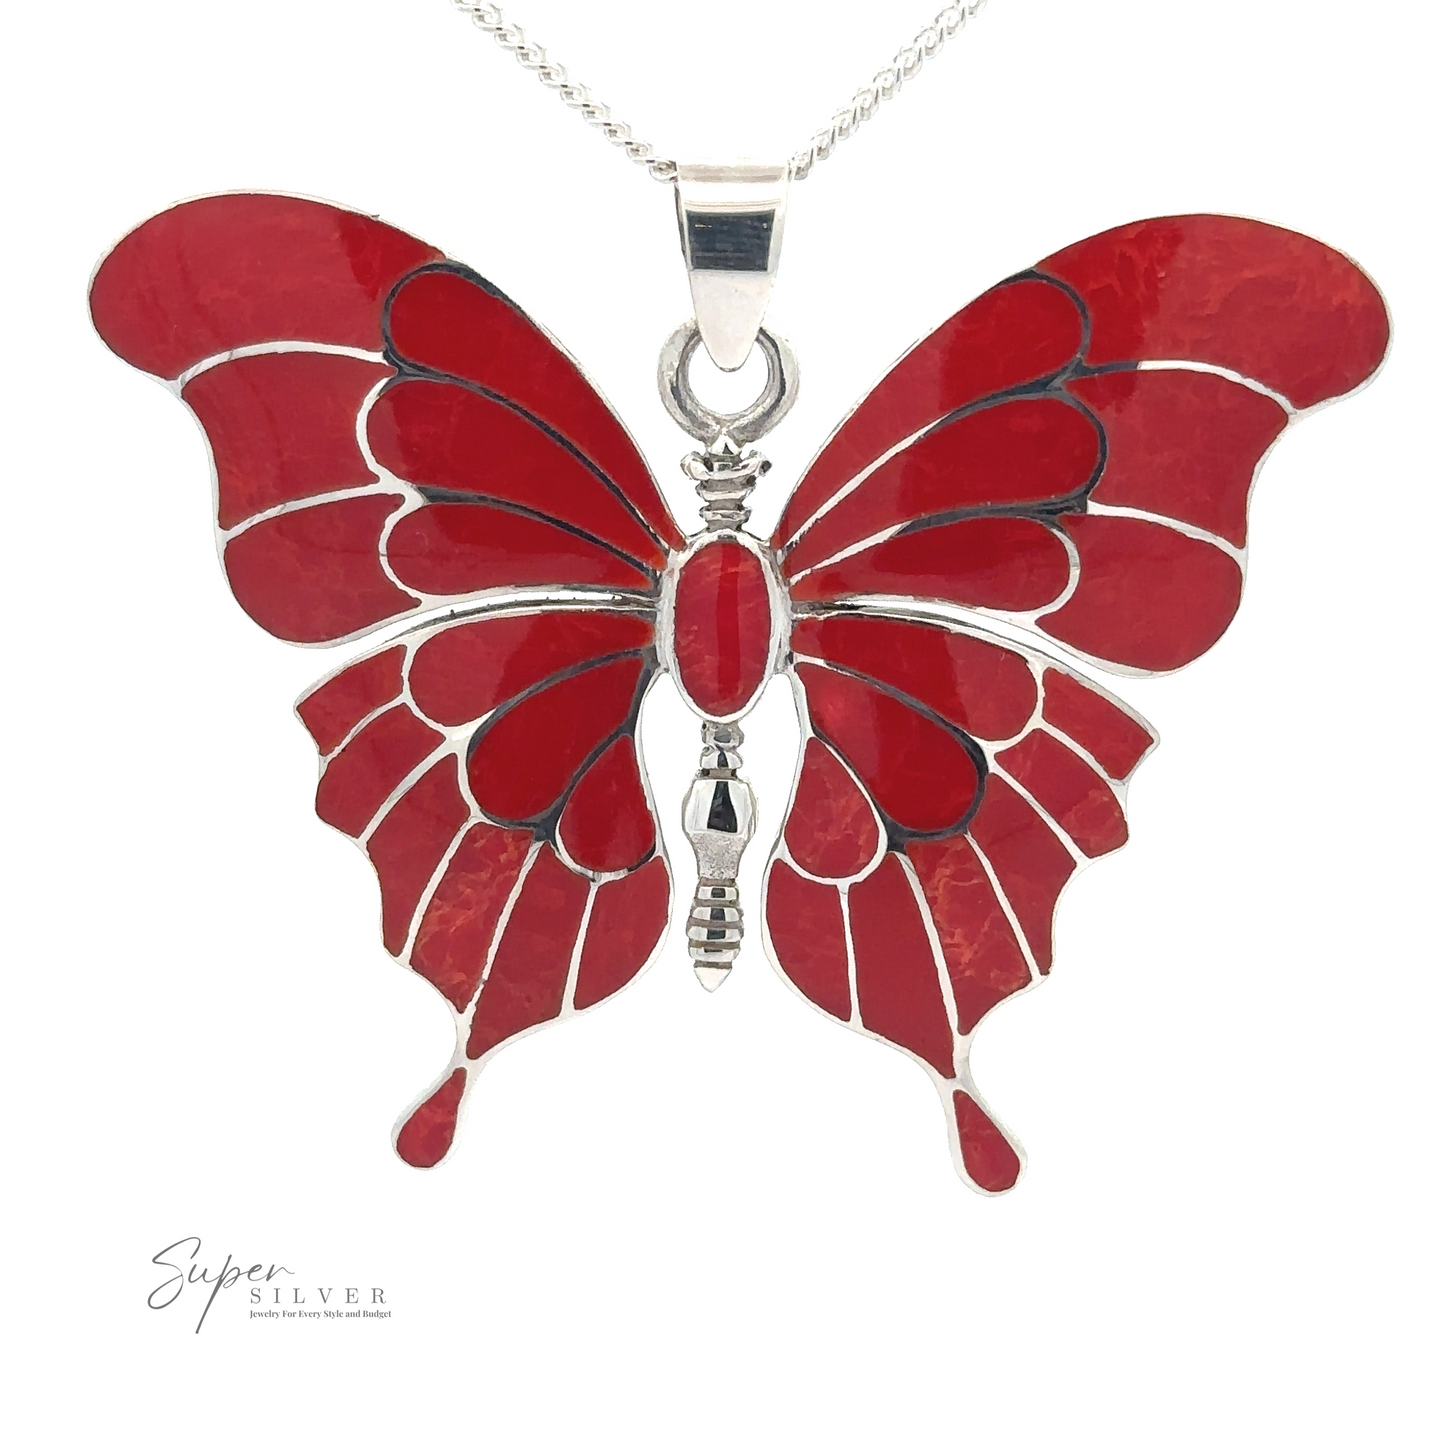 A stunning statement necklace, this piece features a butterfly-shaped pendant with intricate red wings and design elements. Crafted from high-quality materials, it proudly bears the name "Stunning Inlay Butterfly Pendant" near the bottom left corner of the image.